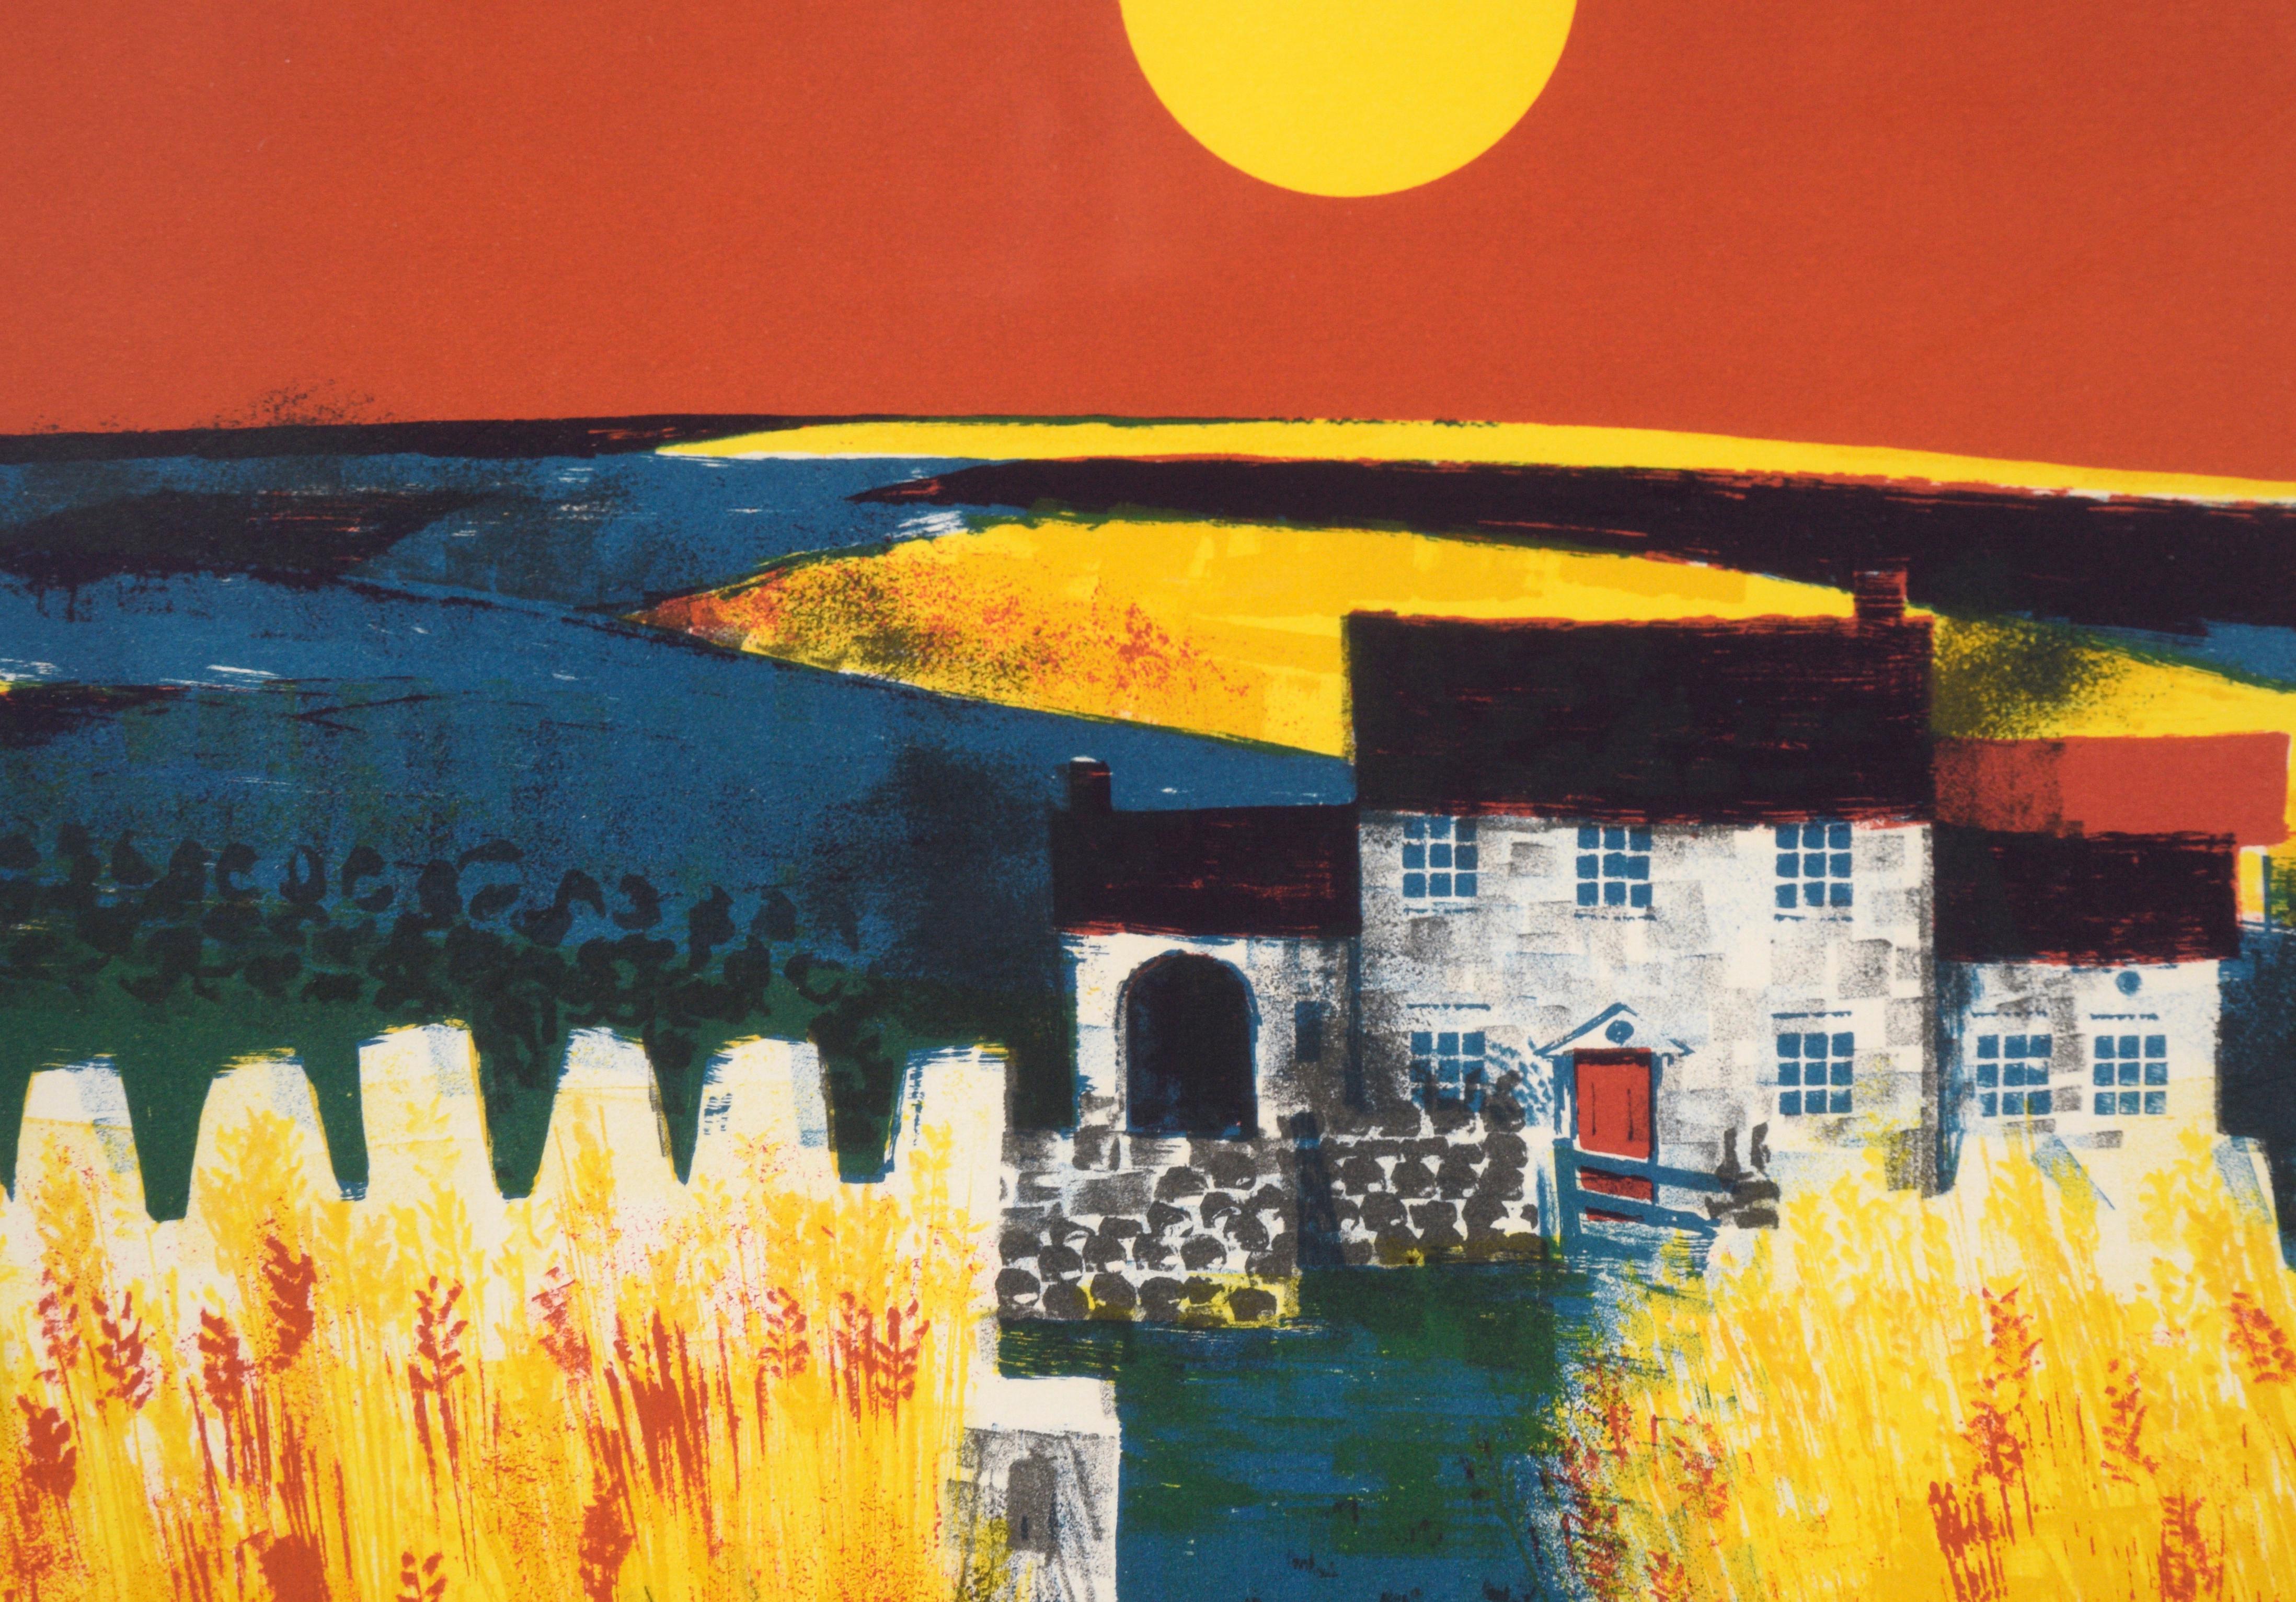 Farmhouse and the Wheat Field at Sunset - Landscape Lithograph in Ink on Paper - Modern Print by Edward Ripley